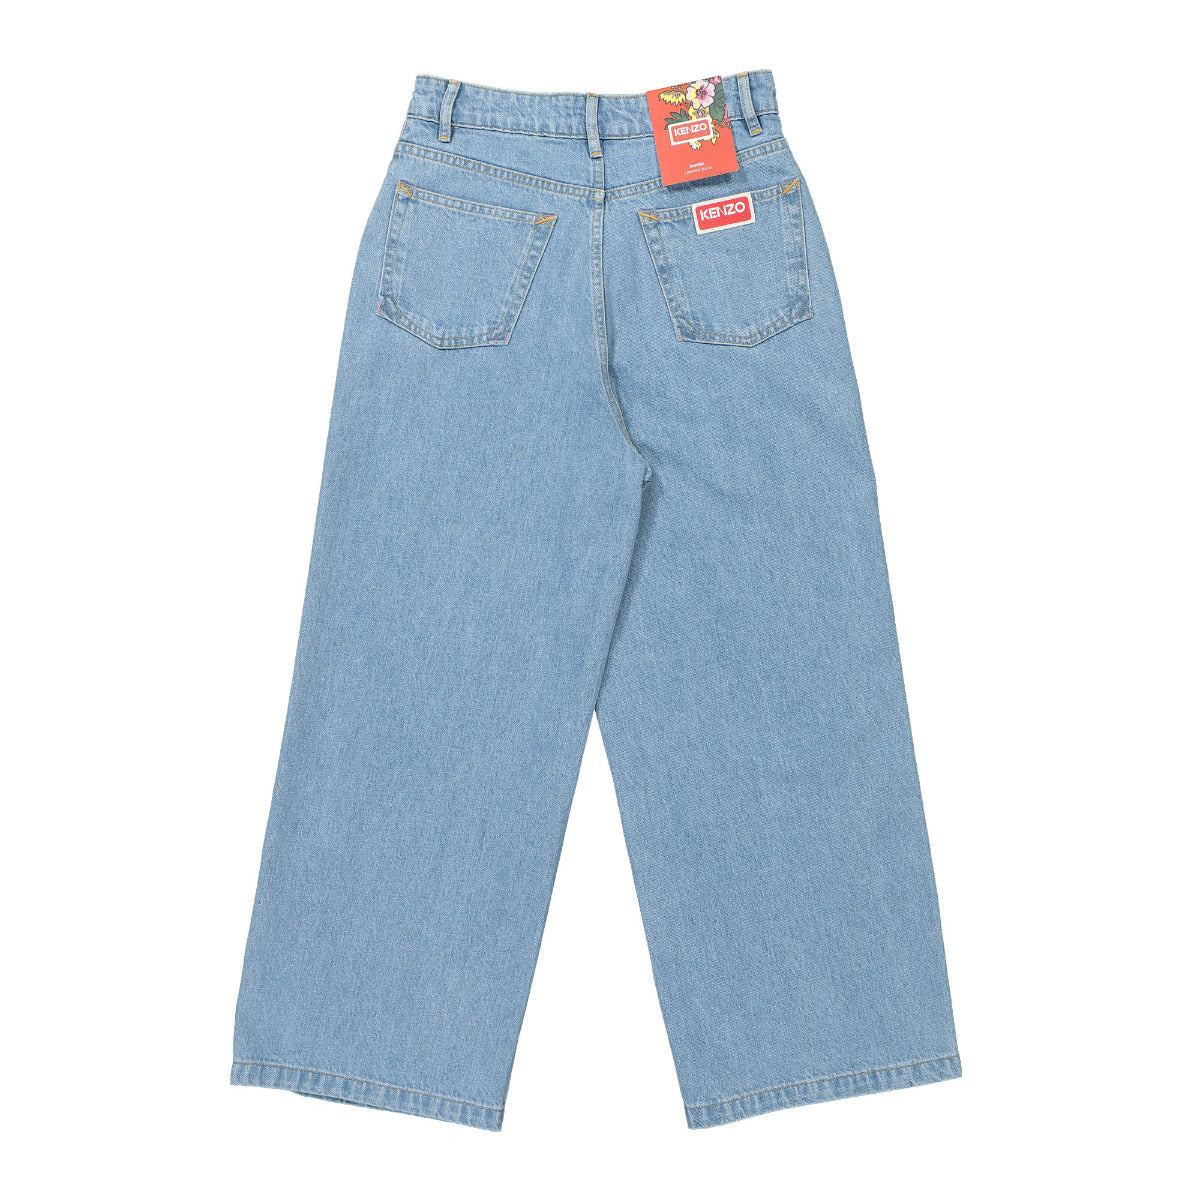 Sumire Cropped Jeans